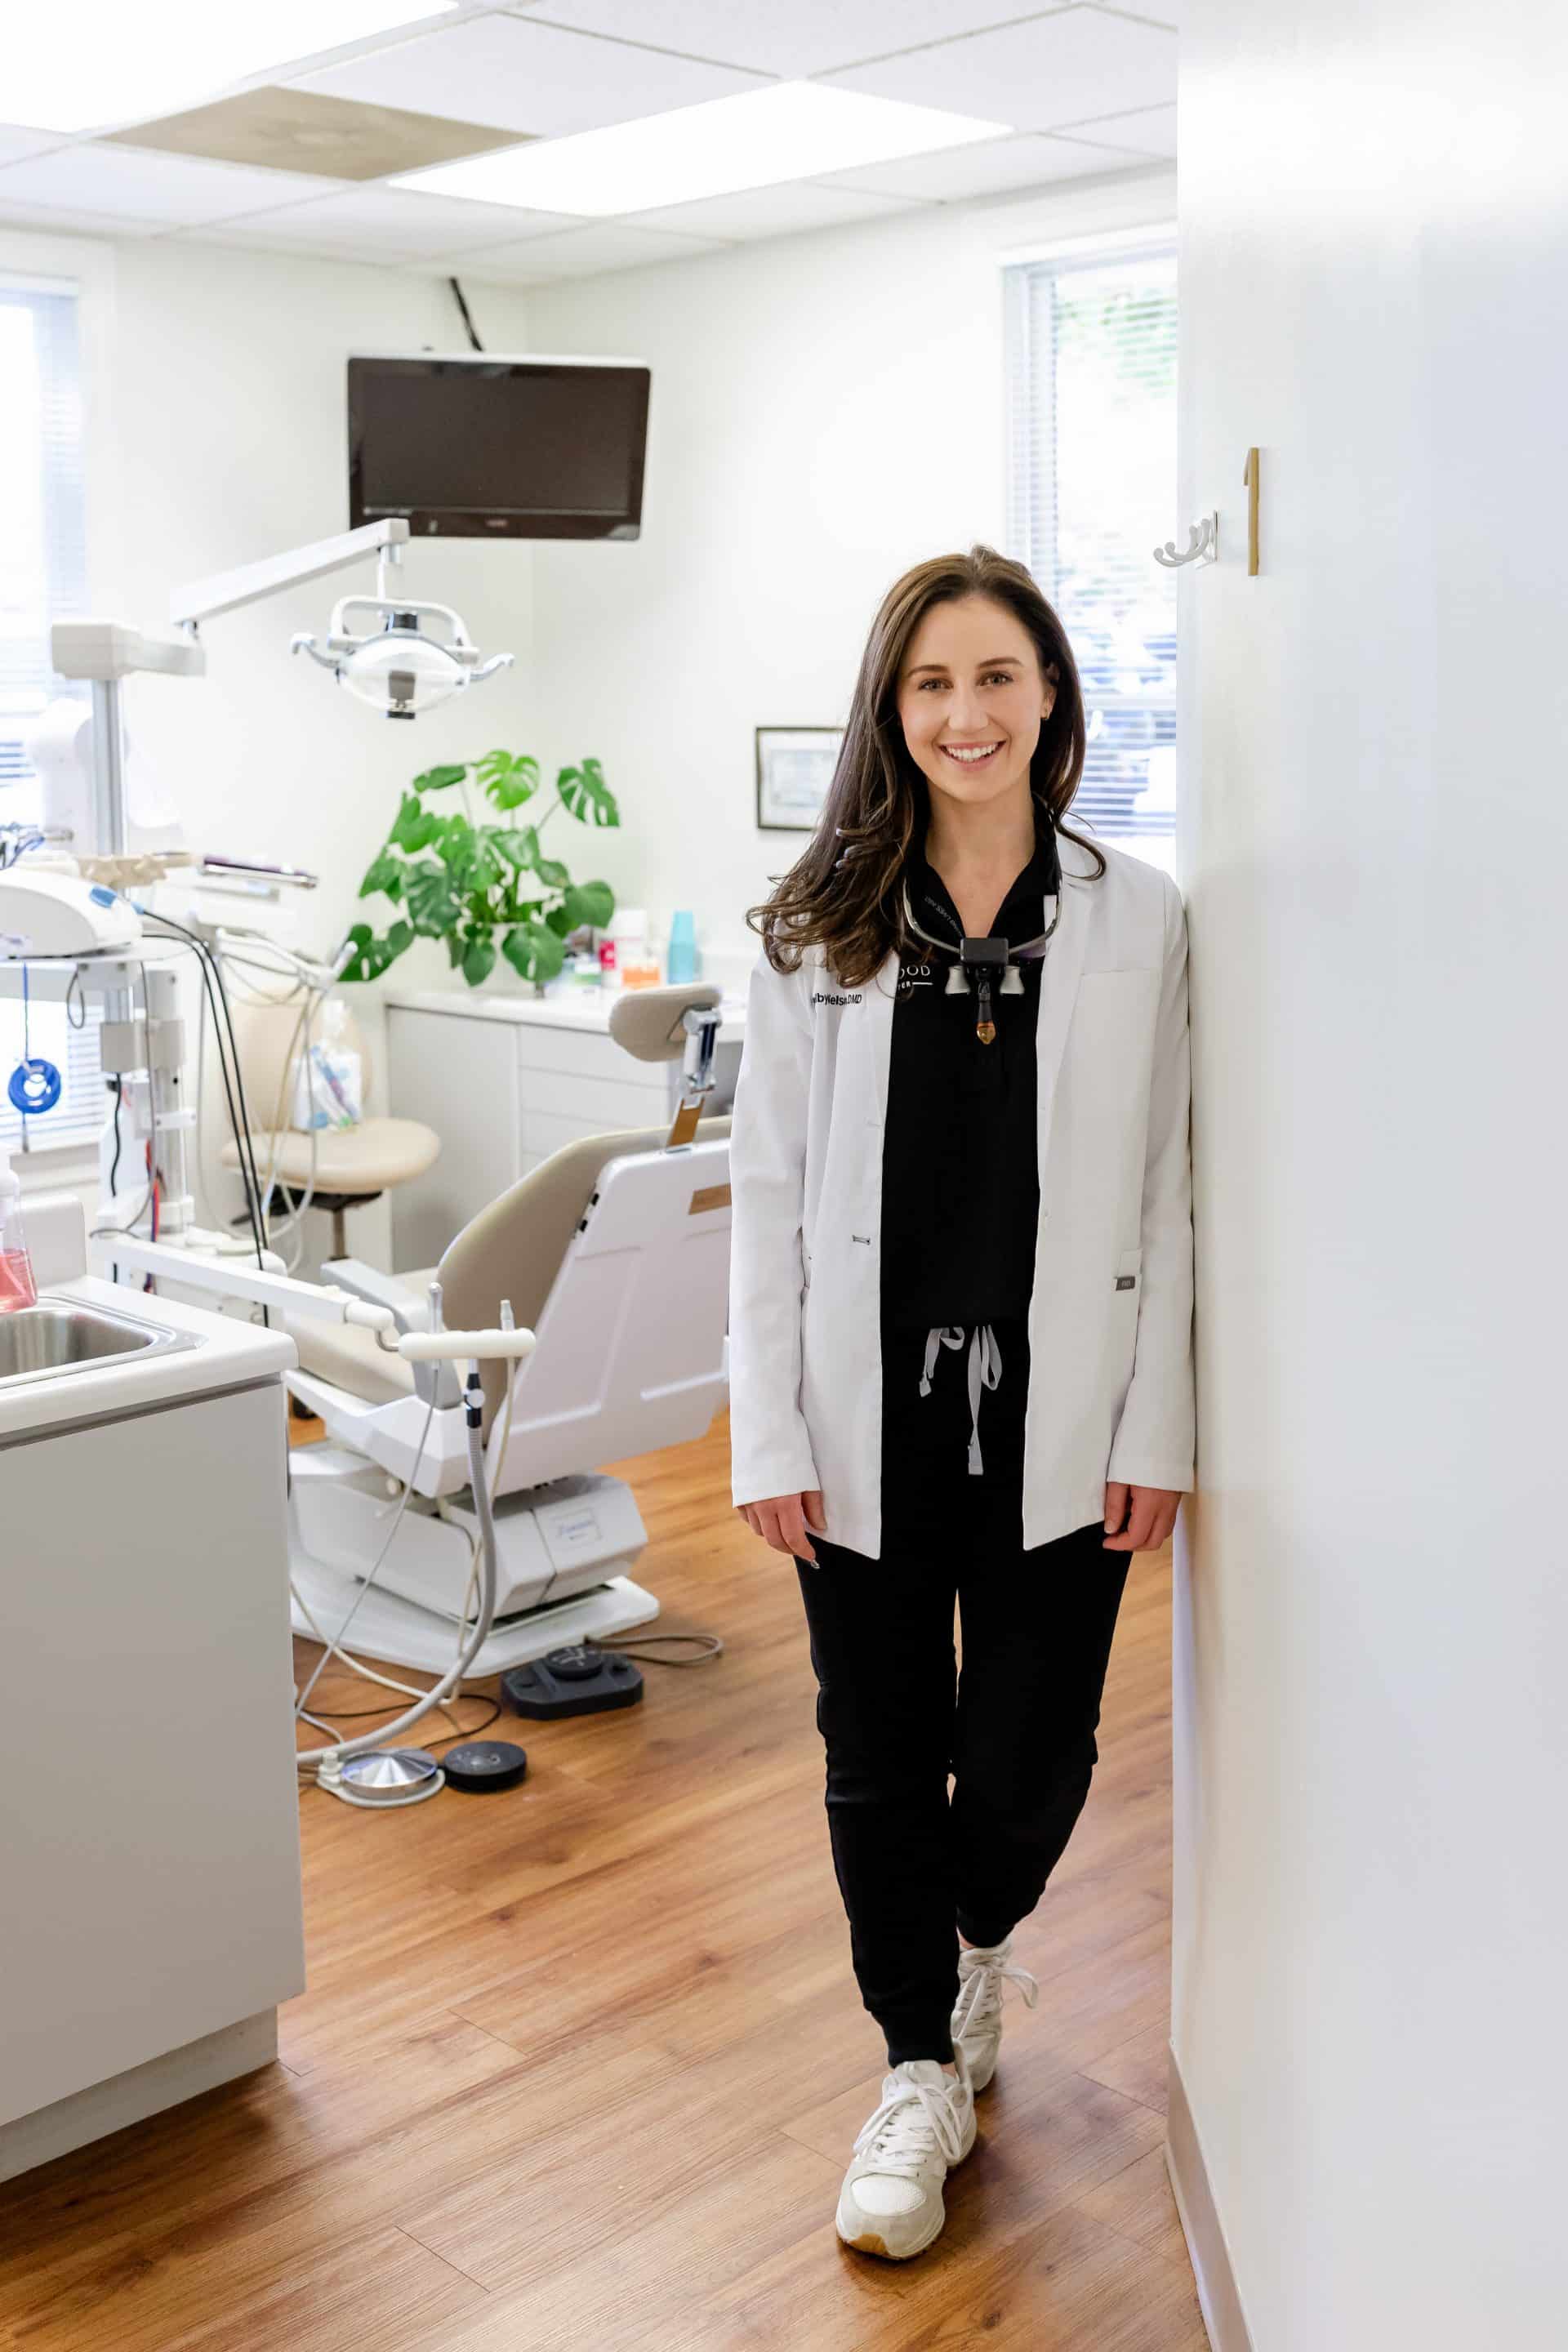 Dr. Shelby Nelson, DMD, at Brentwood Dental Care in Brentwood TN